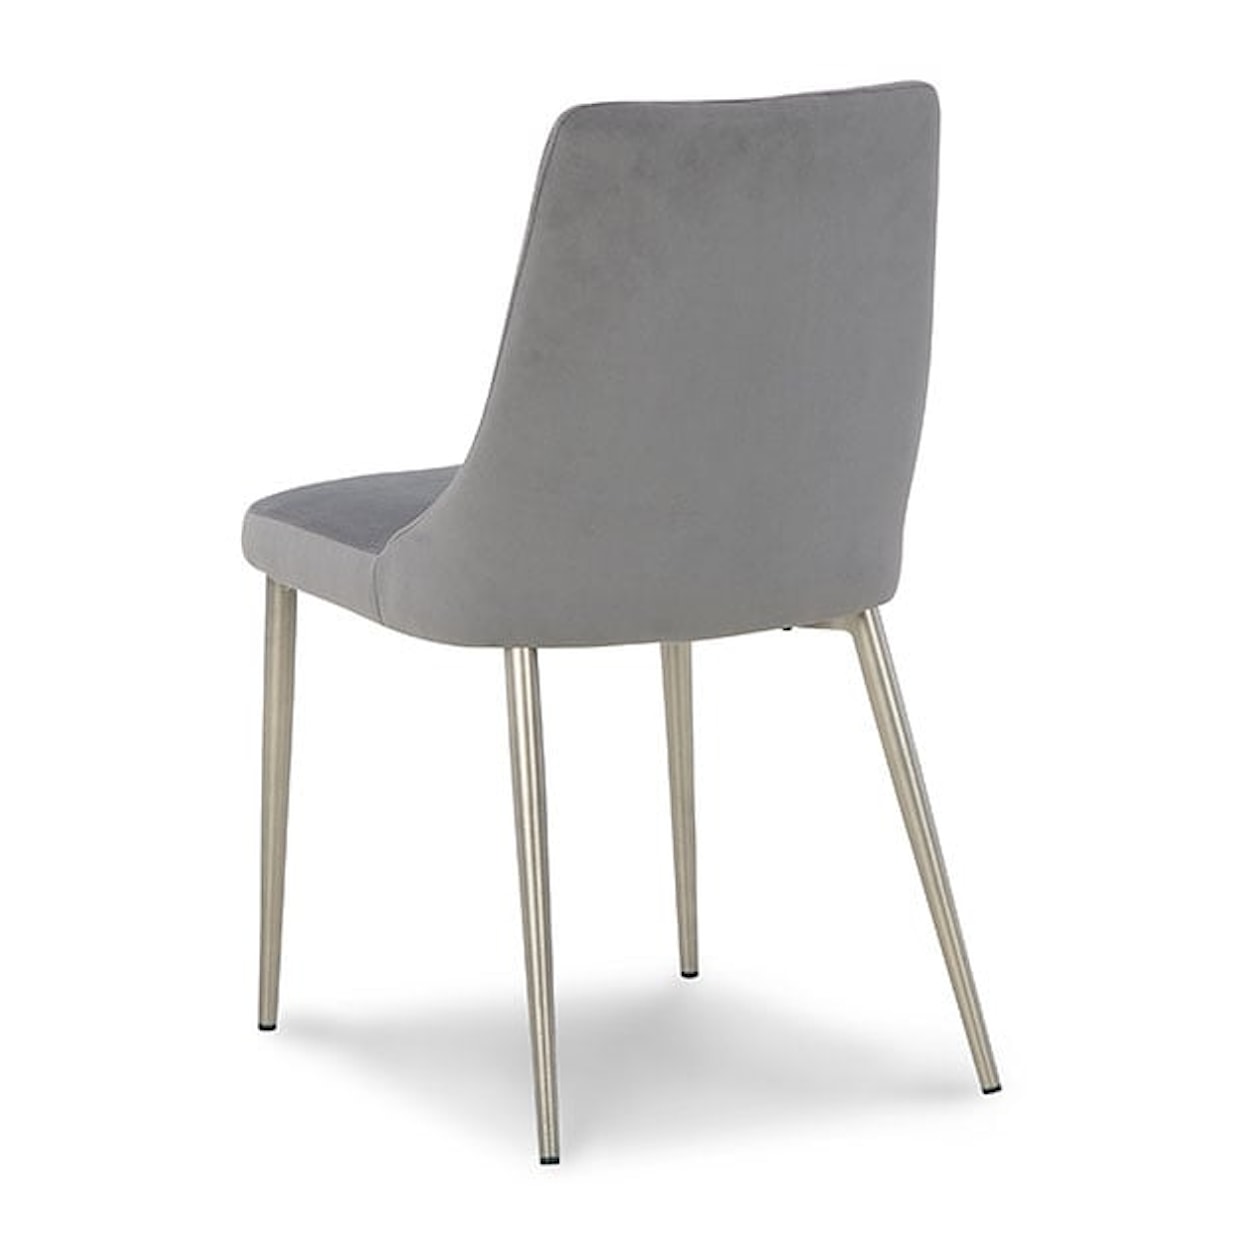 Signature Design Barchoni Upholstered Dining Side Chair